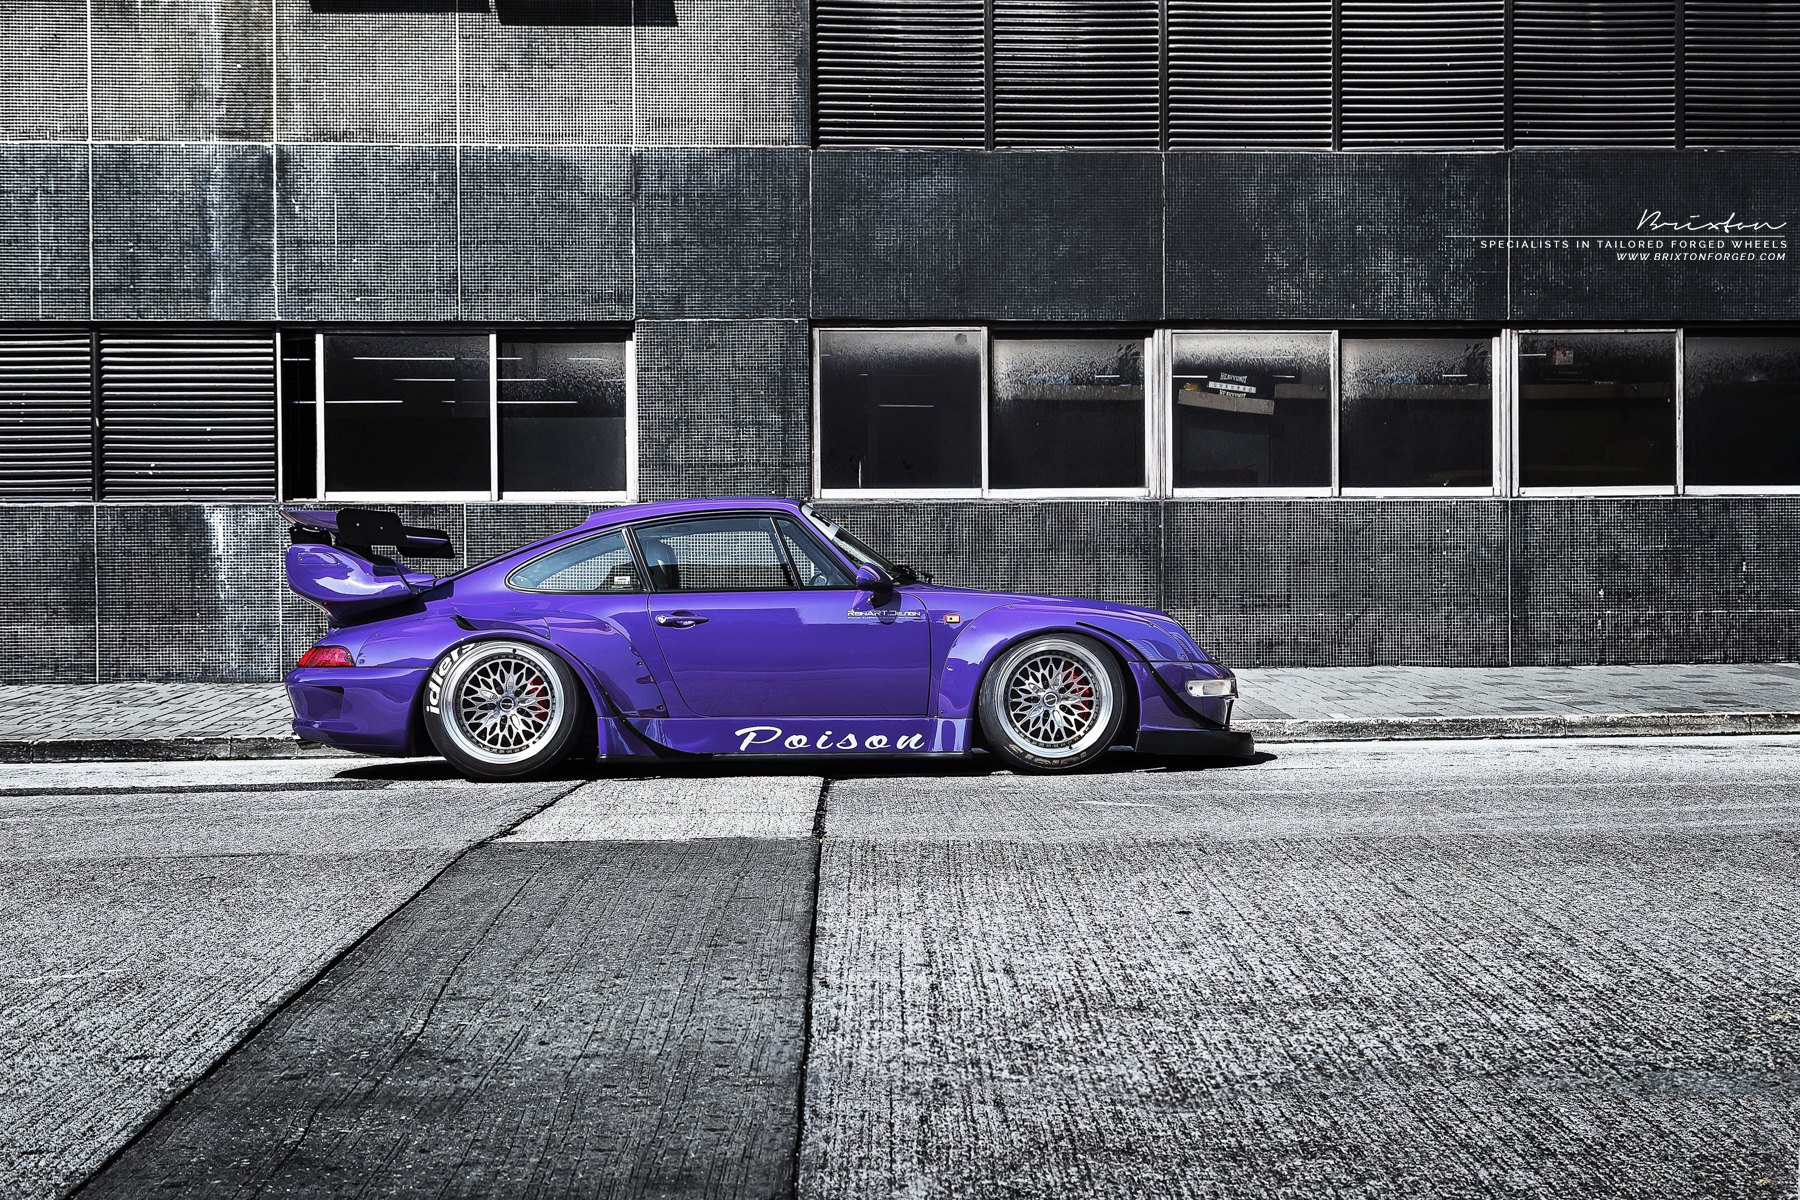 Brushed Clear Brixton Wheels on Purple Porsche 911 - Photo by Brixton Forged Wheels